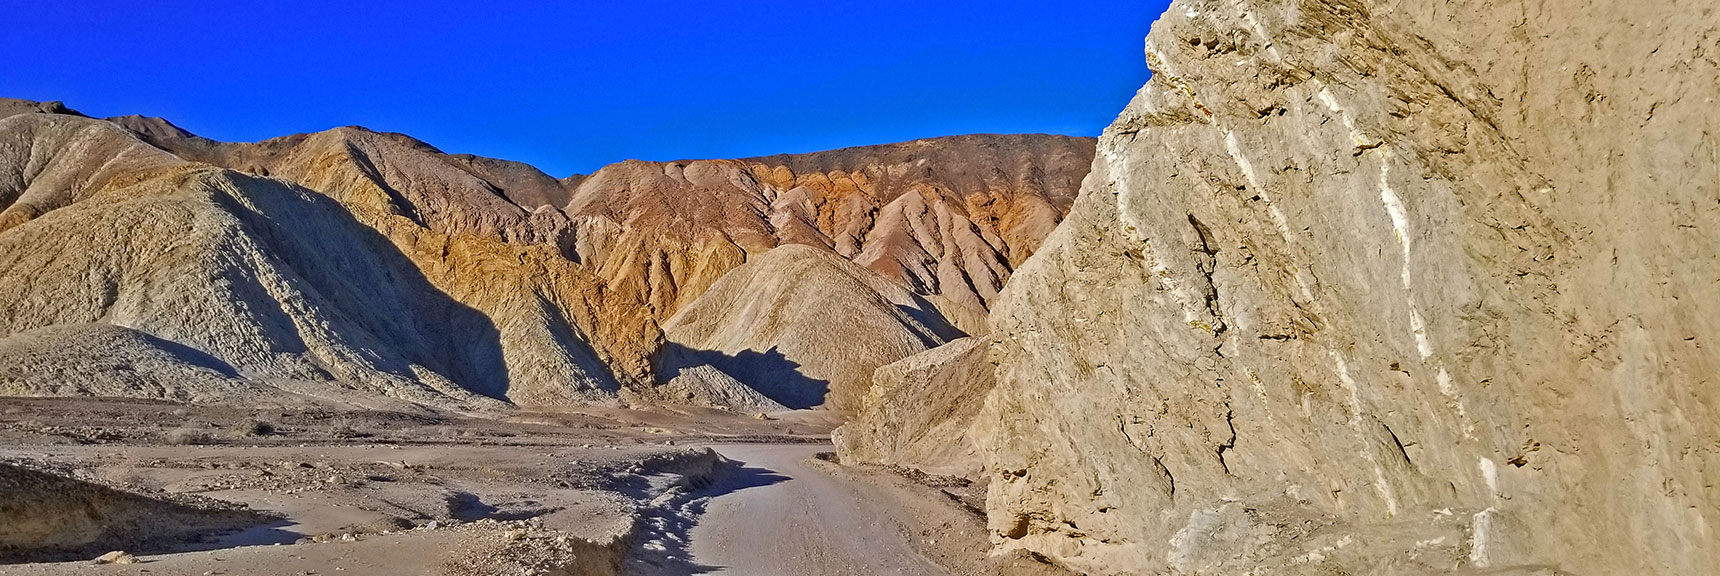 Mud Hills Contain Veins of Solid Rock | Twenty Mule Team Canyon | Death Valley National Park, California